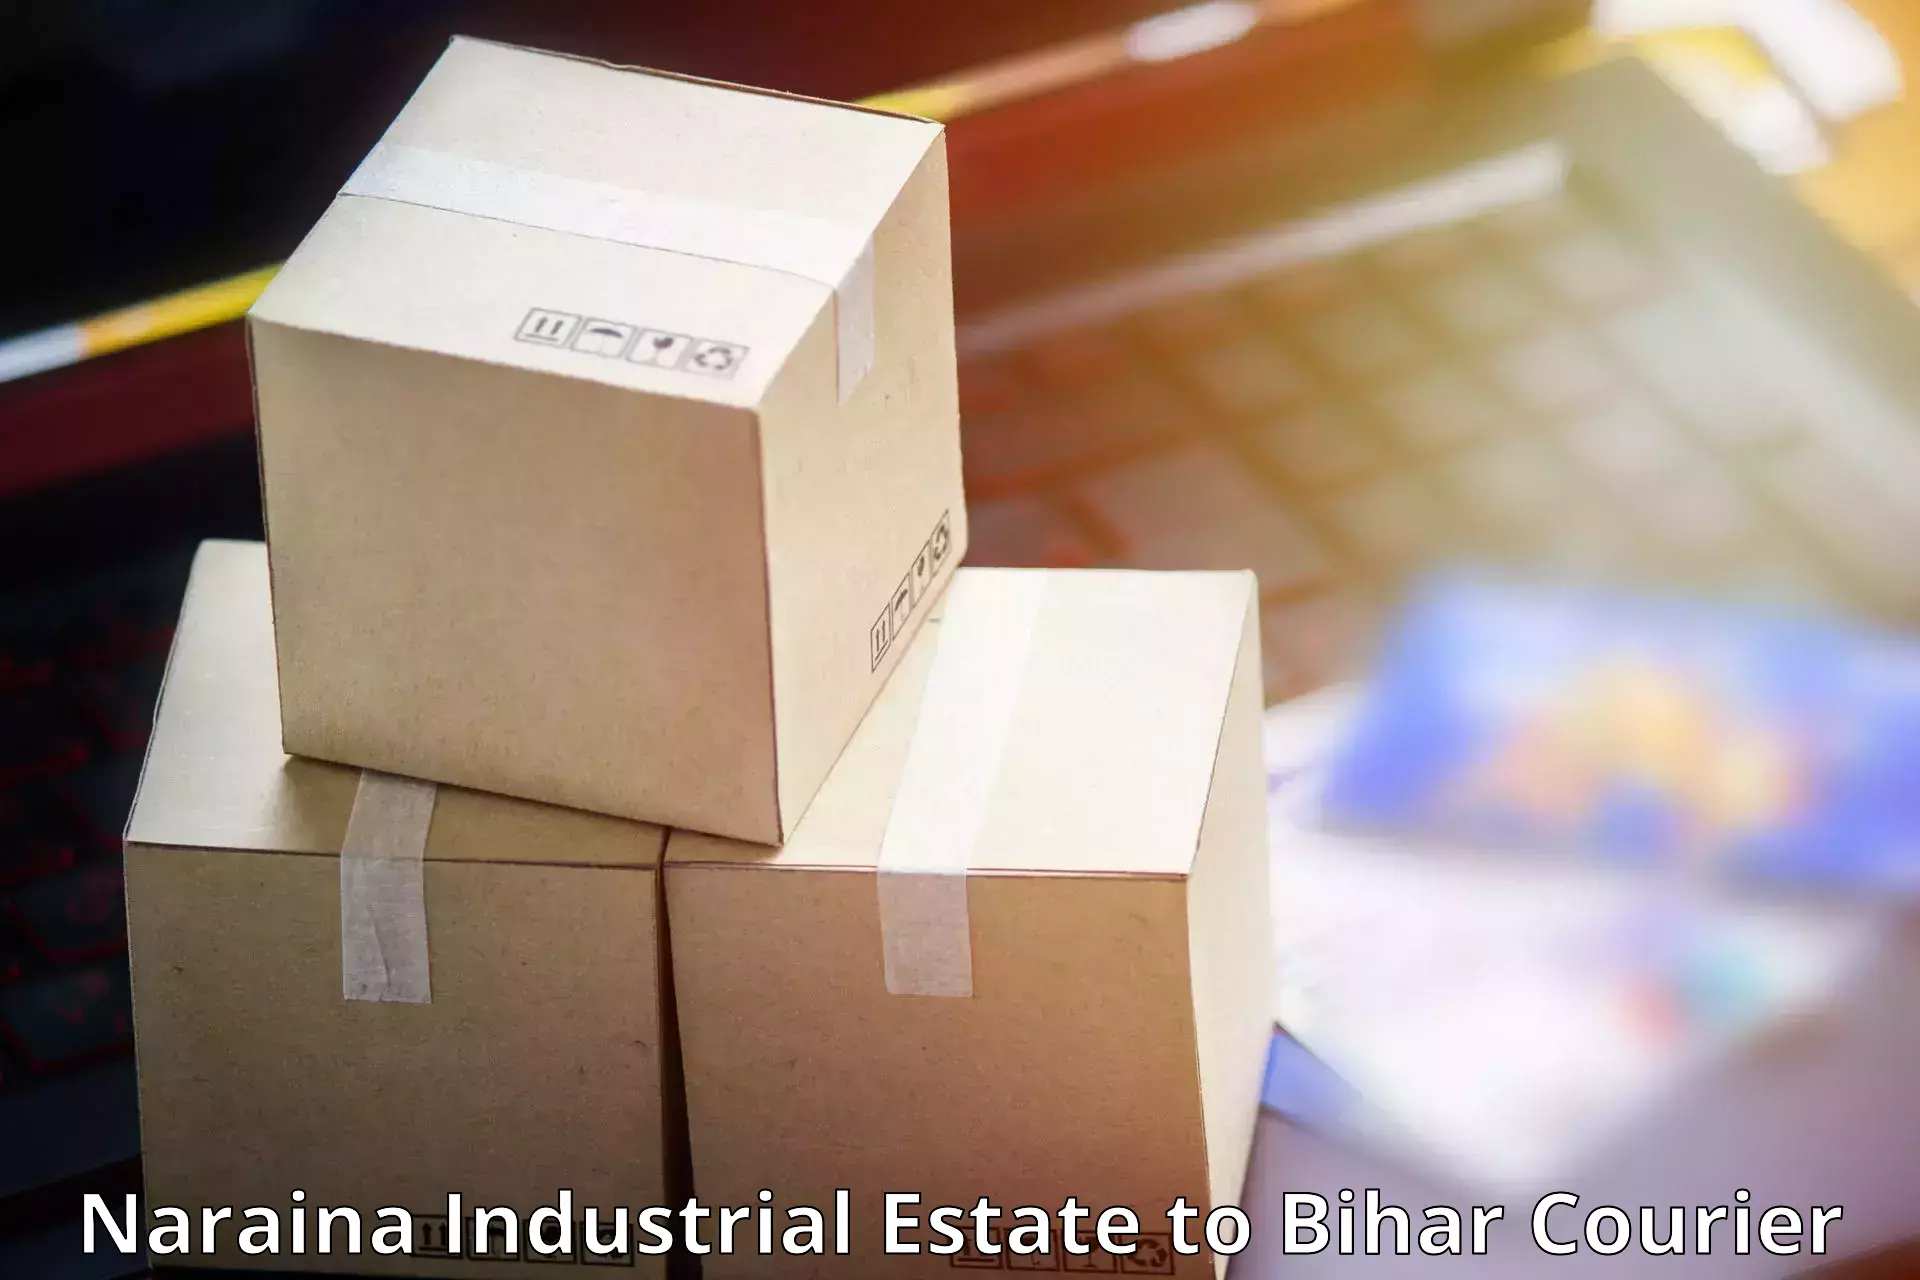 Nationwide parcel services Naraina Industrial Estate to Bihar